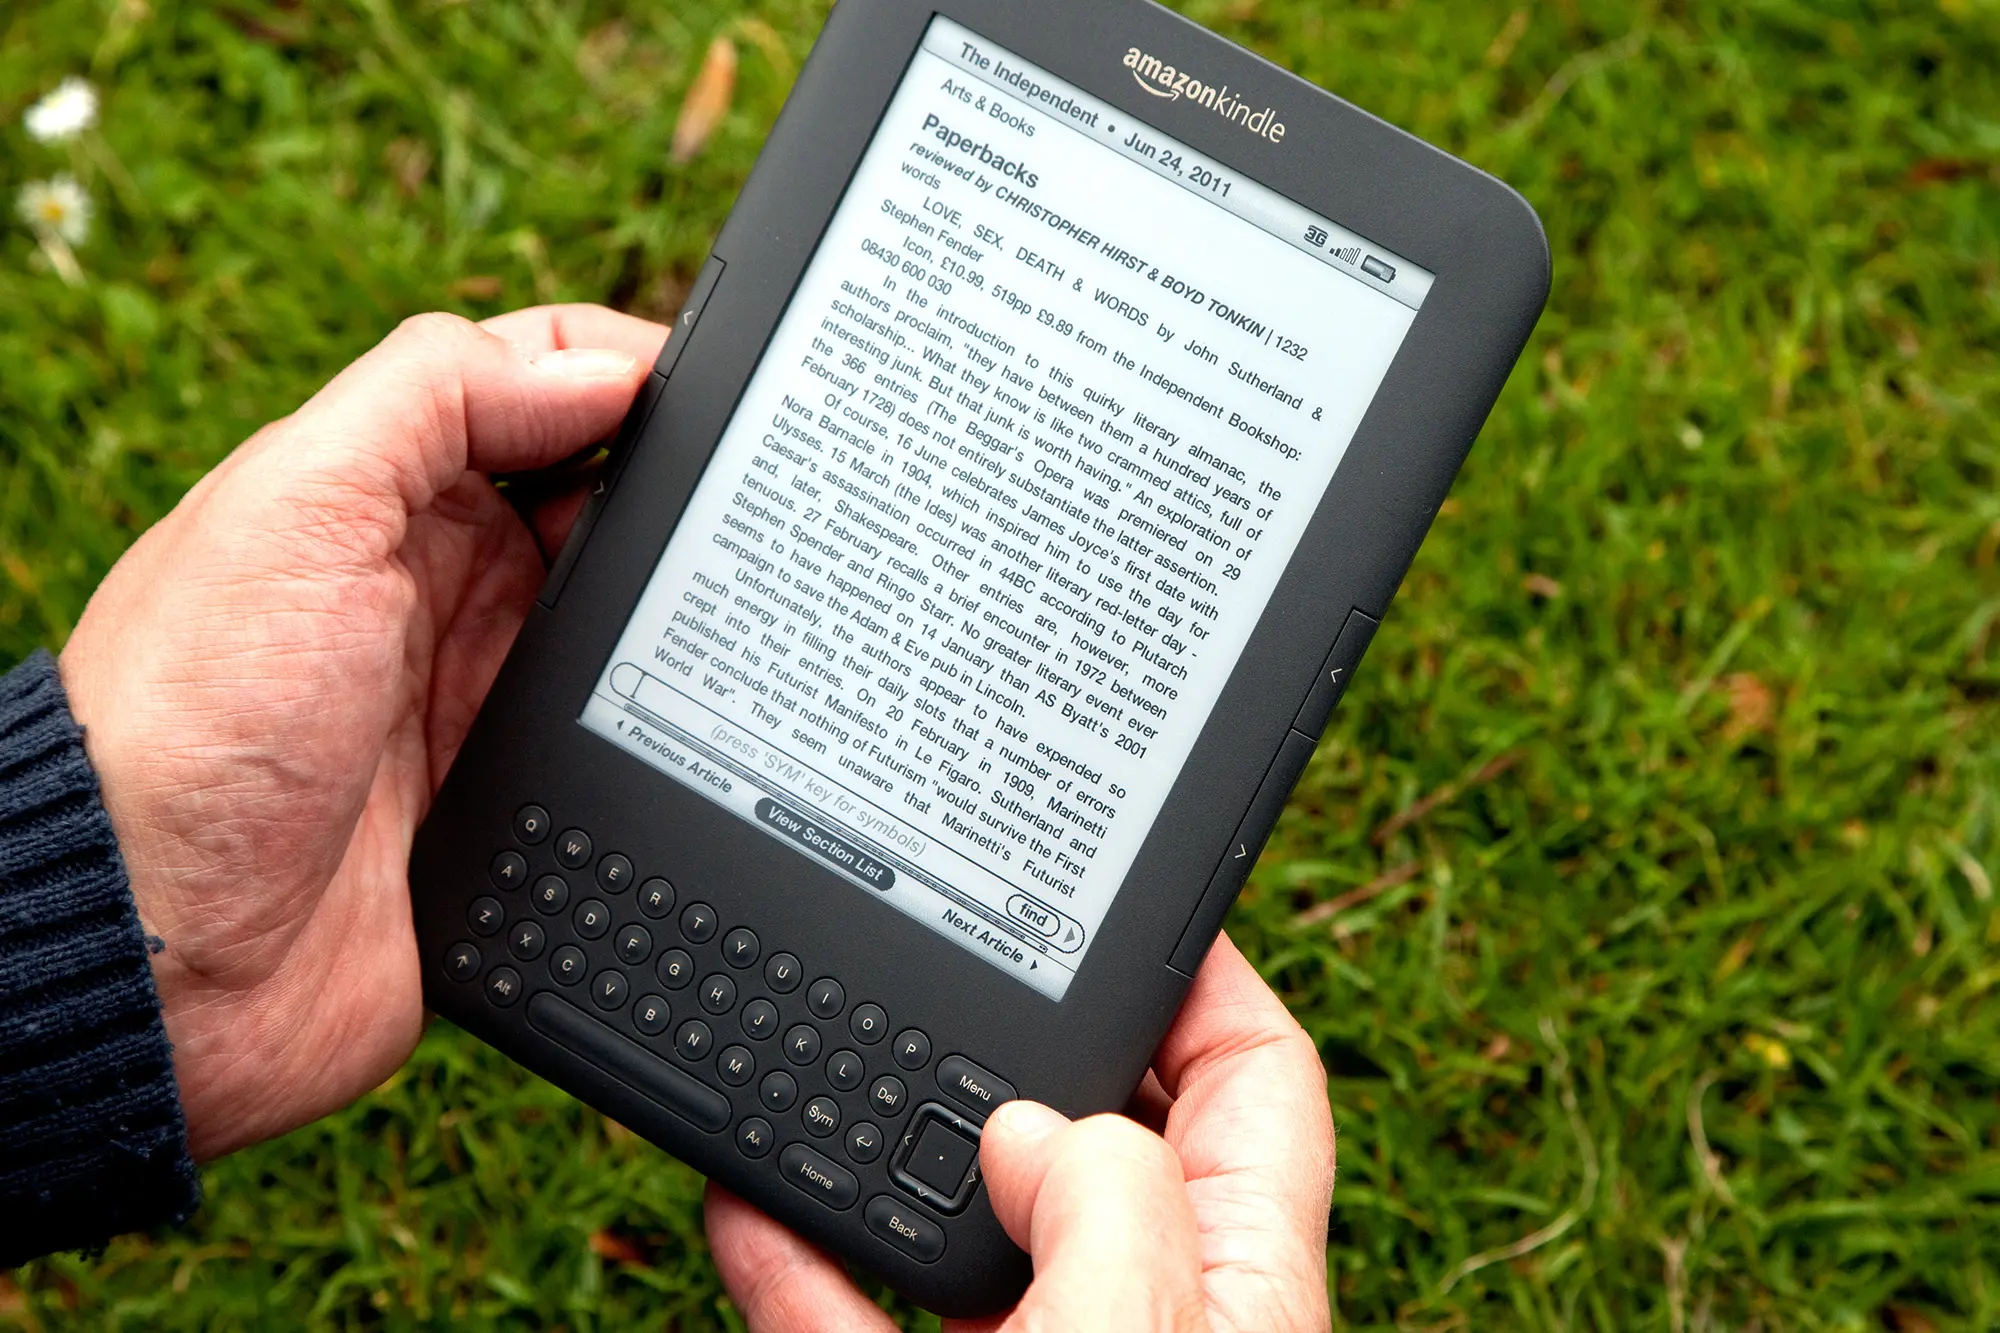 What is Kindle Unlimited?. Kindle Unlimited is a subscription…, by An  Affable Writer